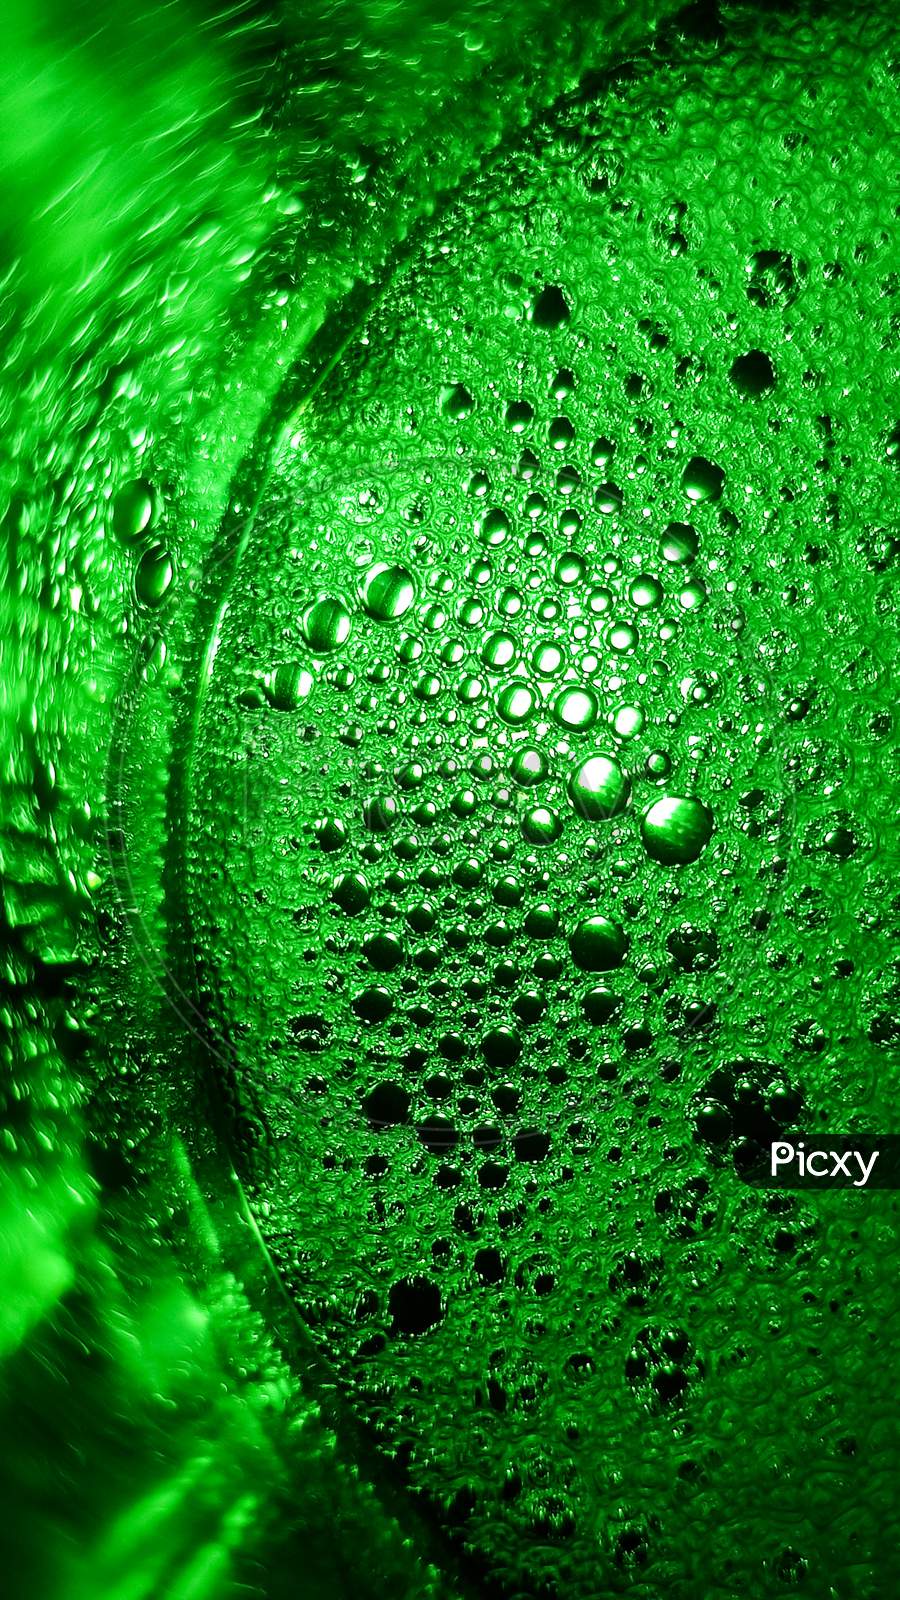 Abstract Of Green Soap Bubbles In A Glass